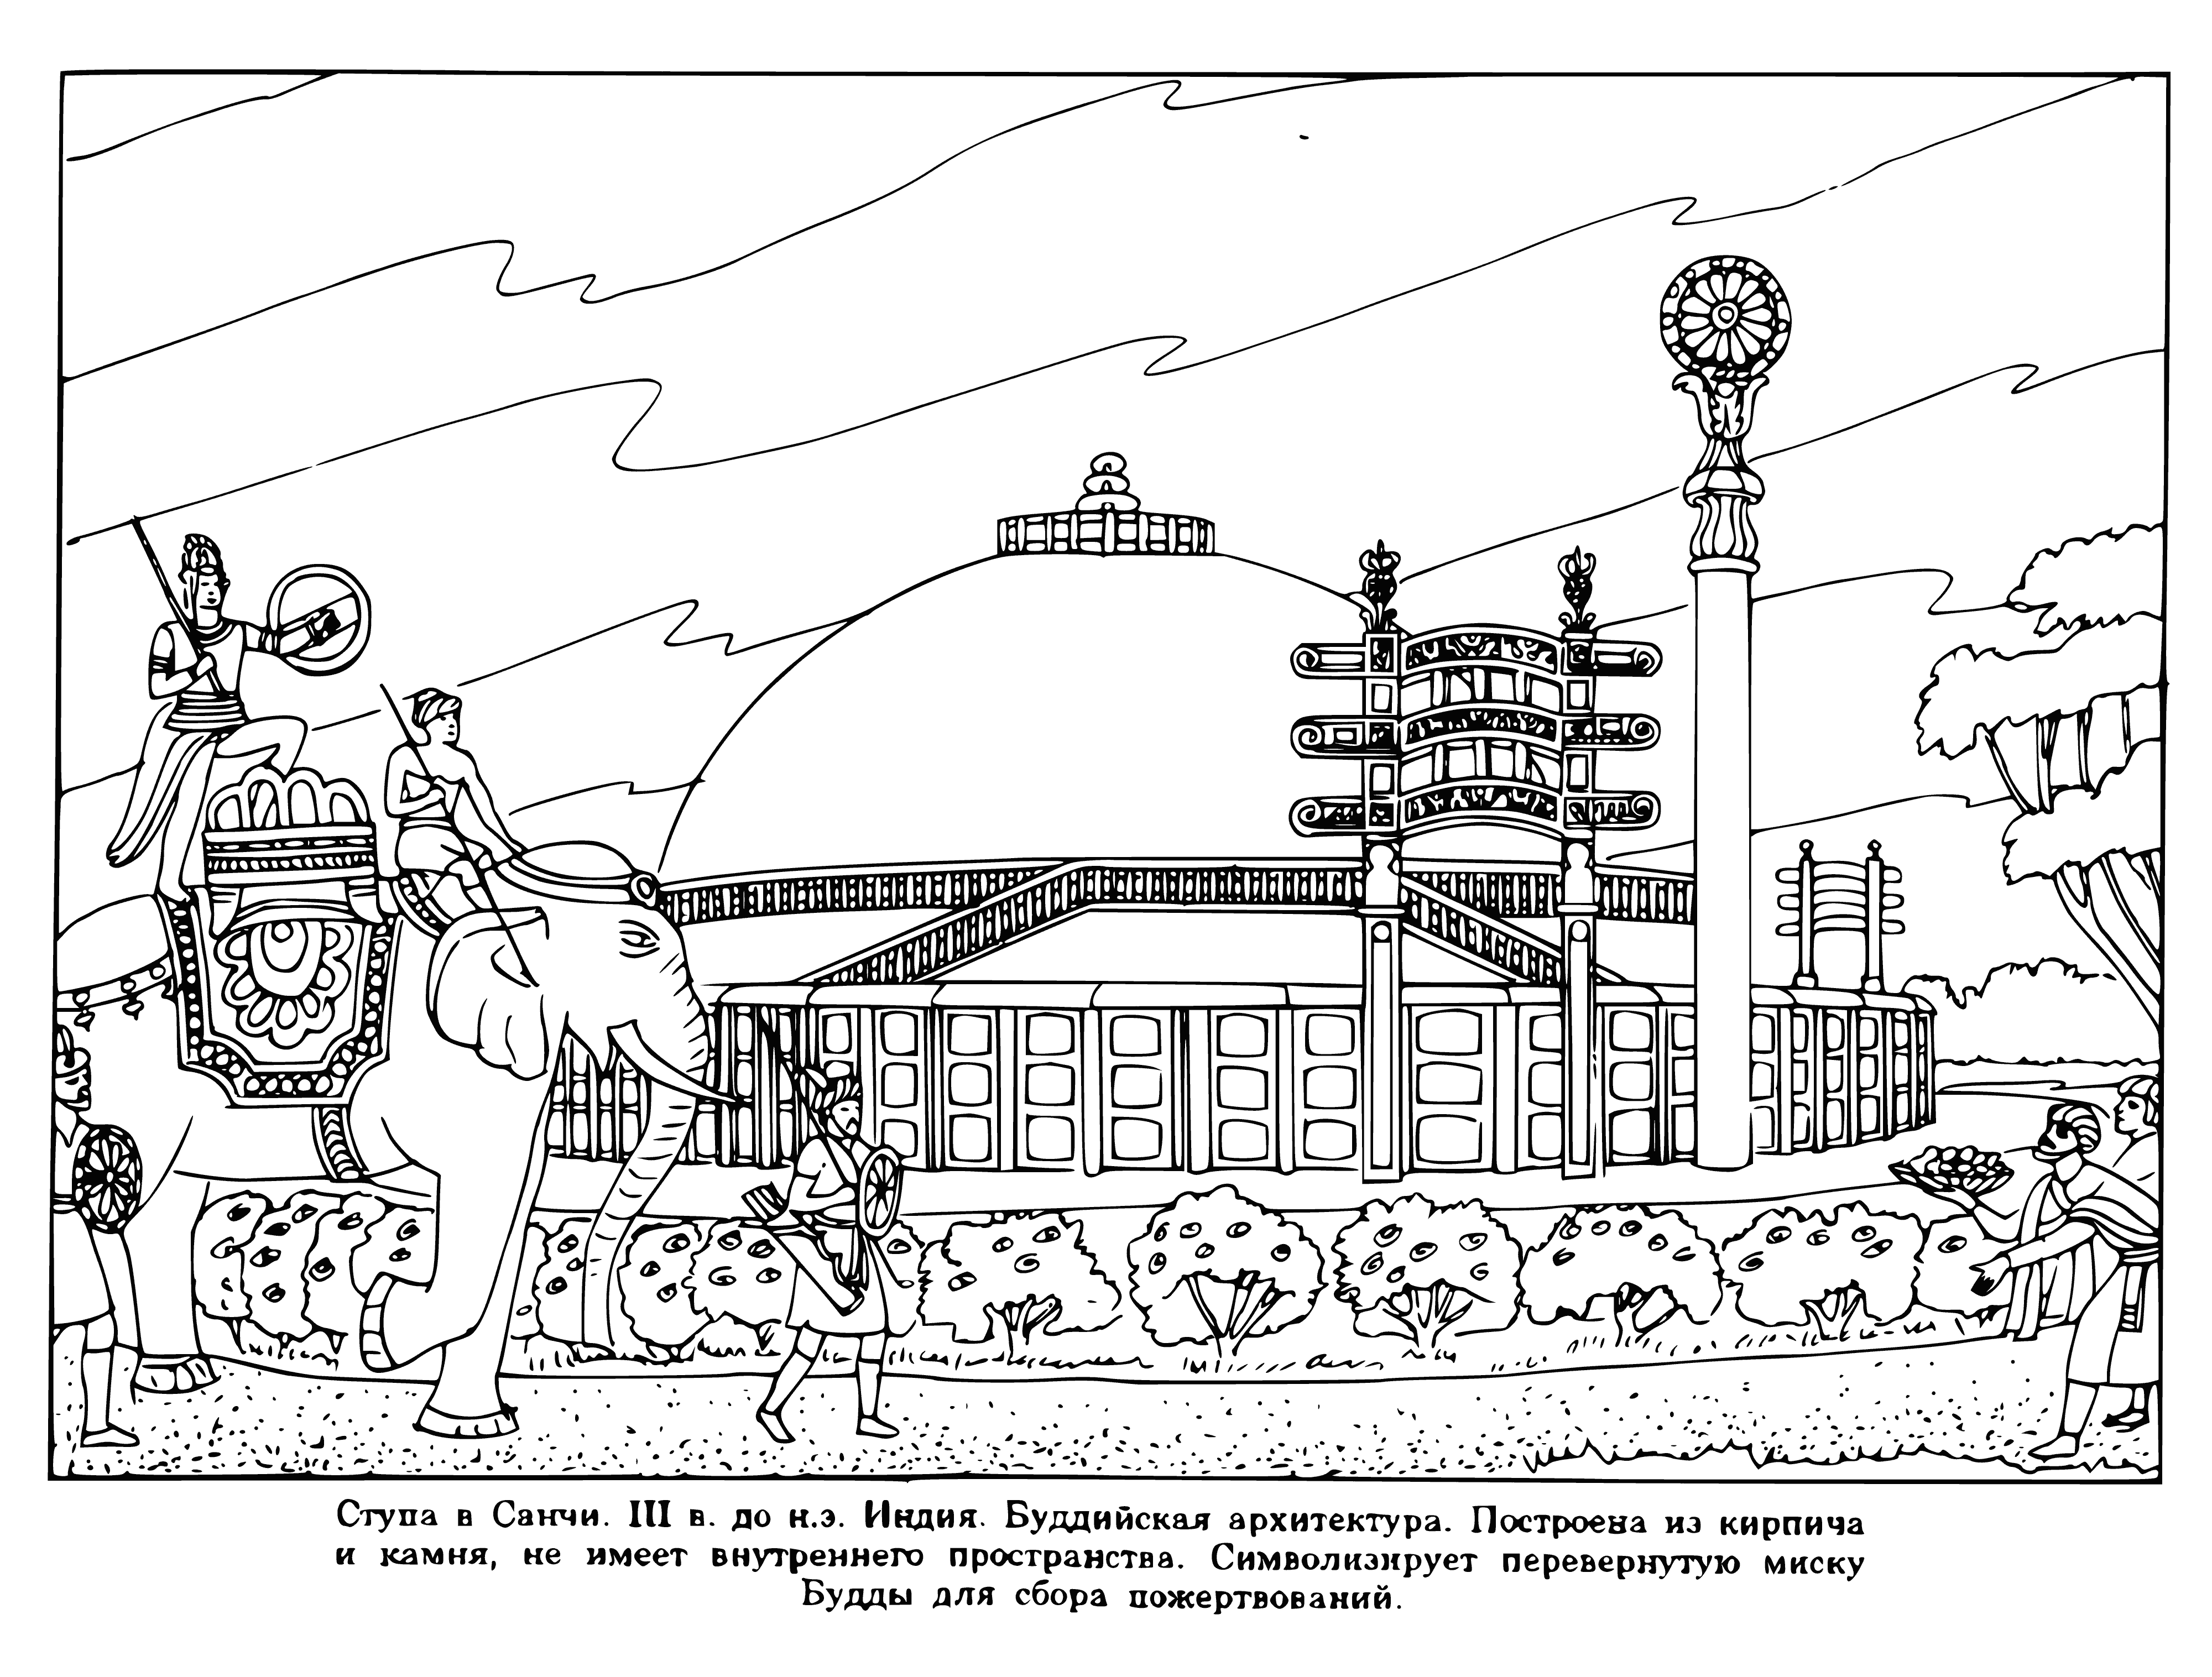 coloring page: Ancient Buddhist temple: stone structure, tall pointed roof, ornate carvings, courtyard w/ fountain in center.